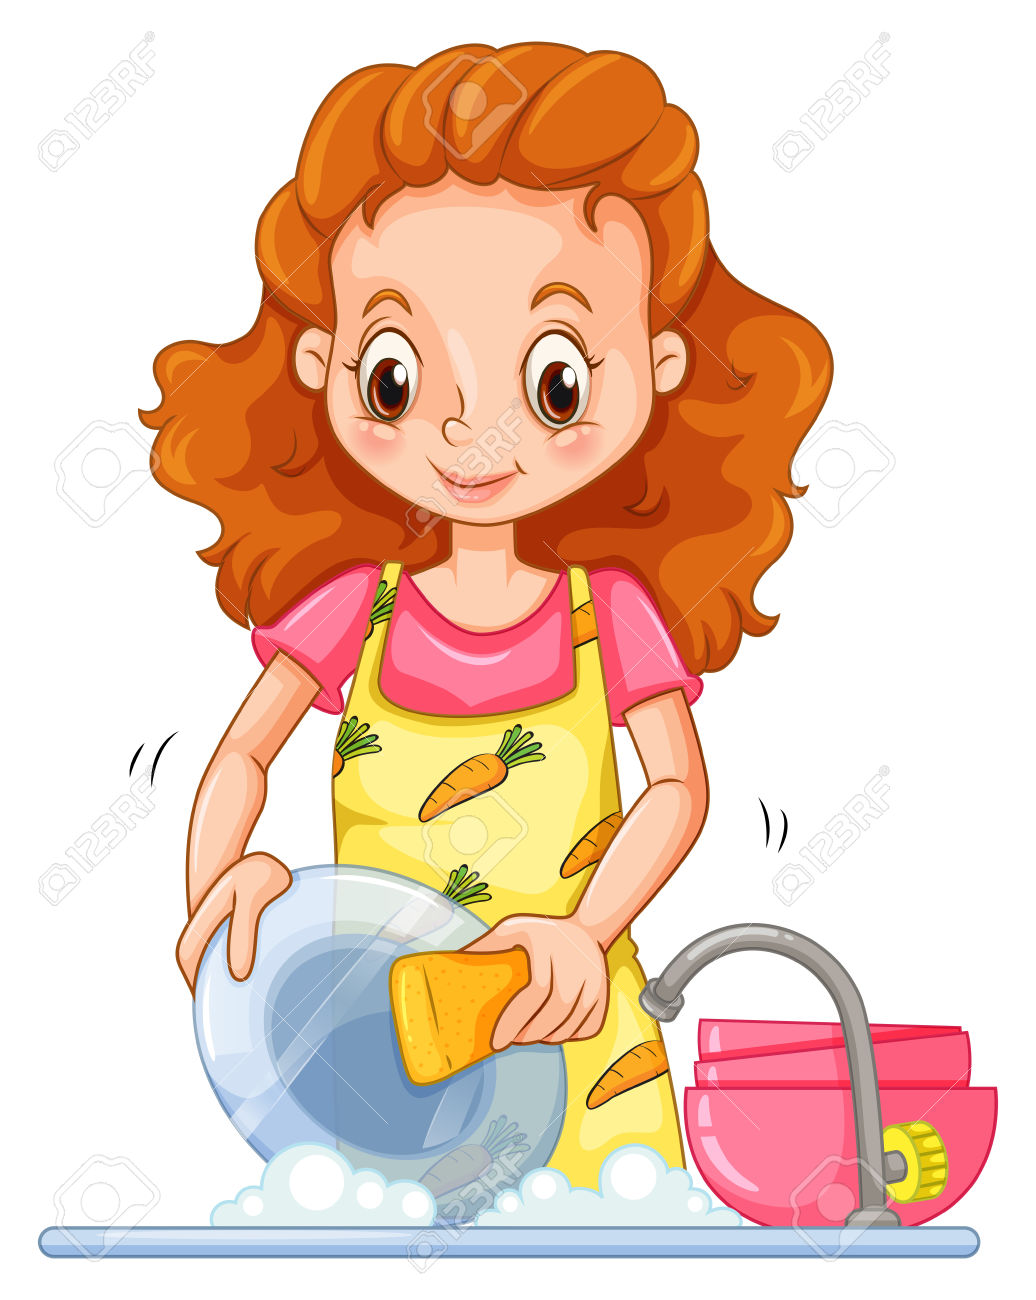 1,794 Washing Dishes Stock Vector Illustration And Royalty Free.